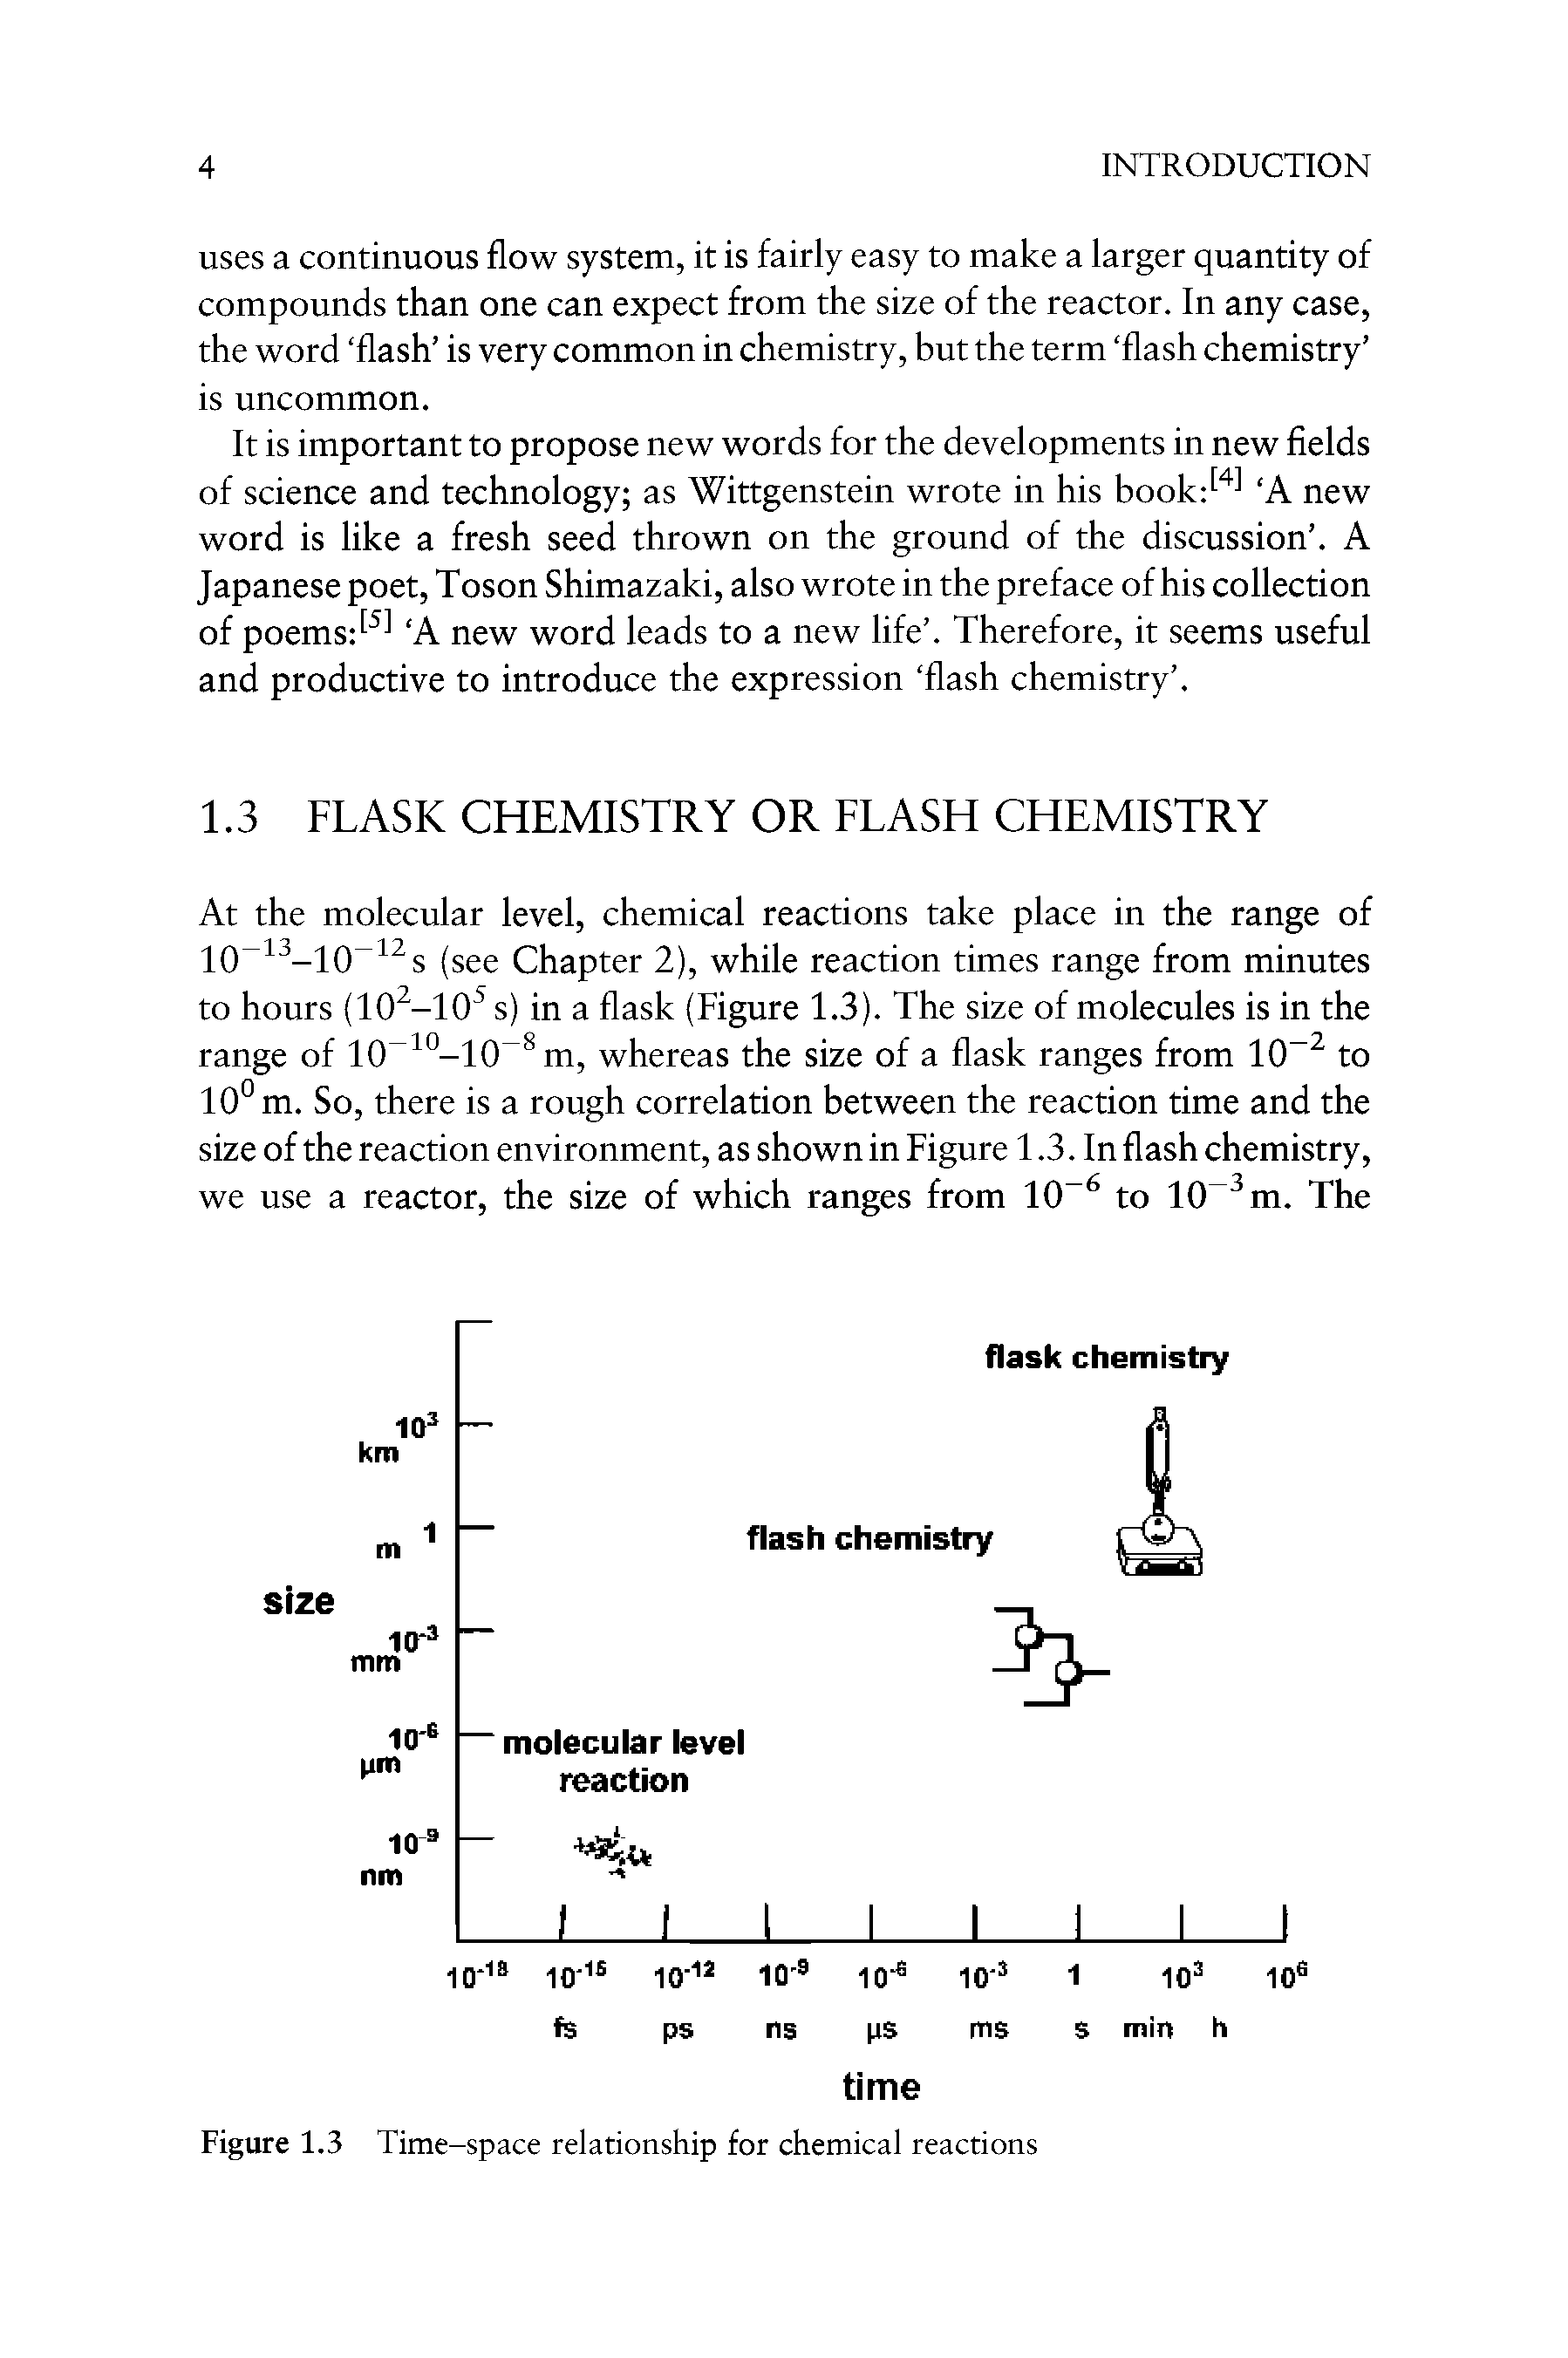 Figure 1.3 Time-space relationship for chemical reactions...